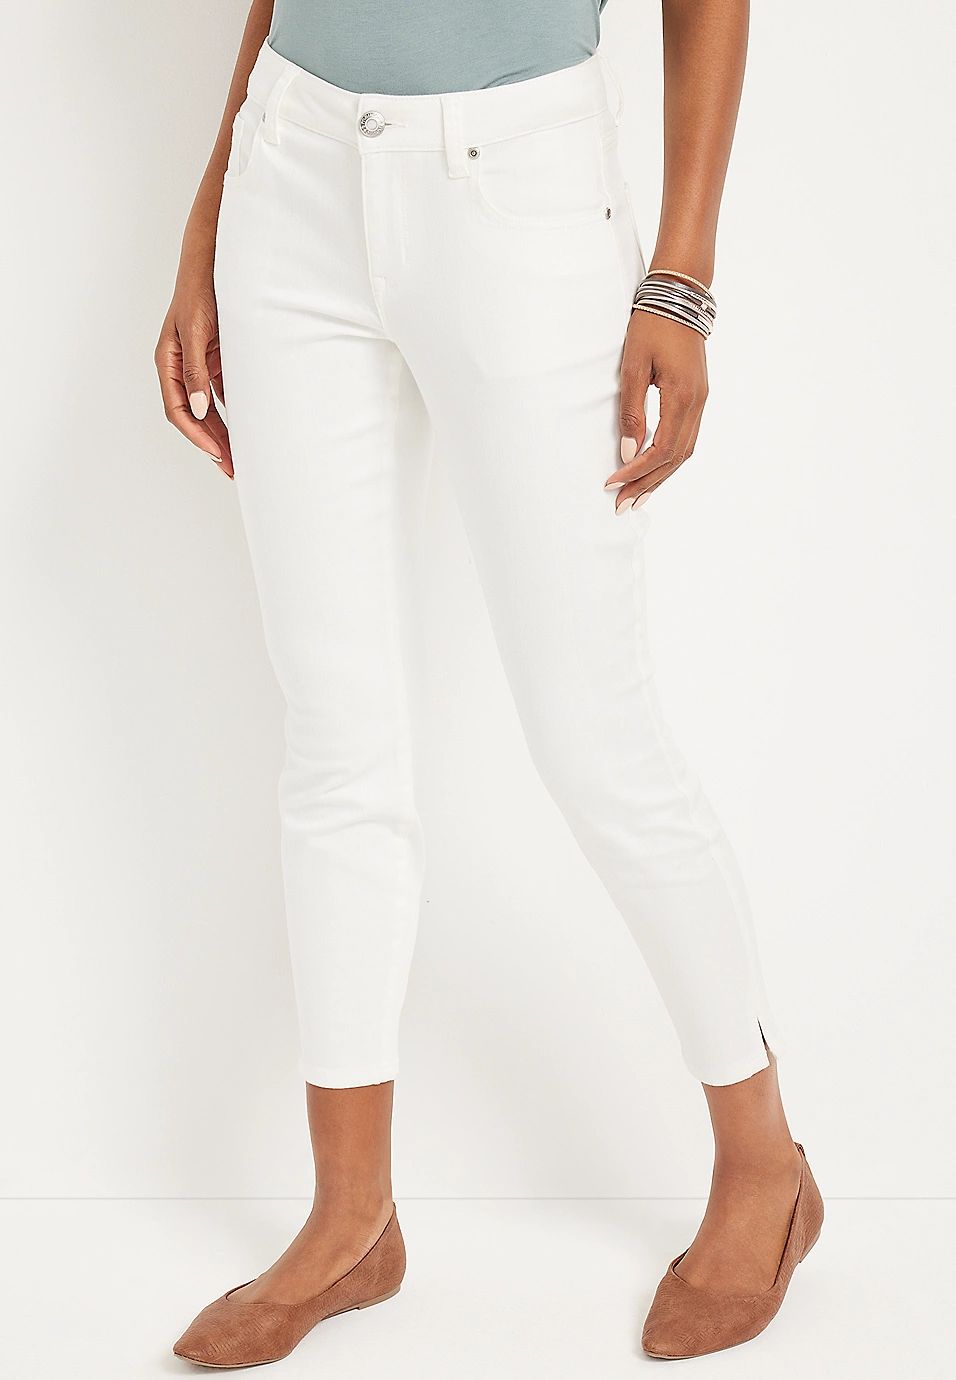 m jeans by maurices™ Skinny Mid Rise Side Slit Ankle Jegging | Maurices